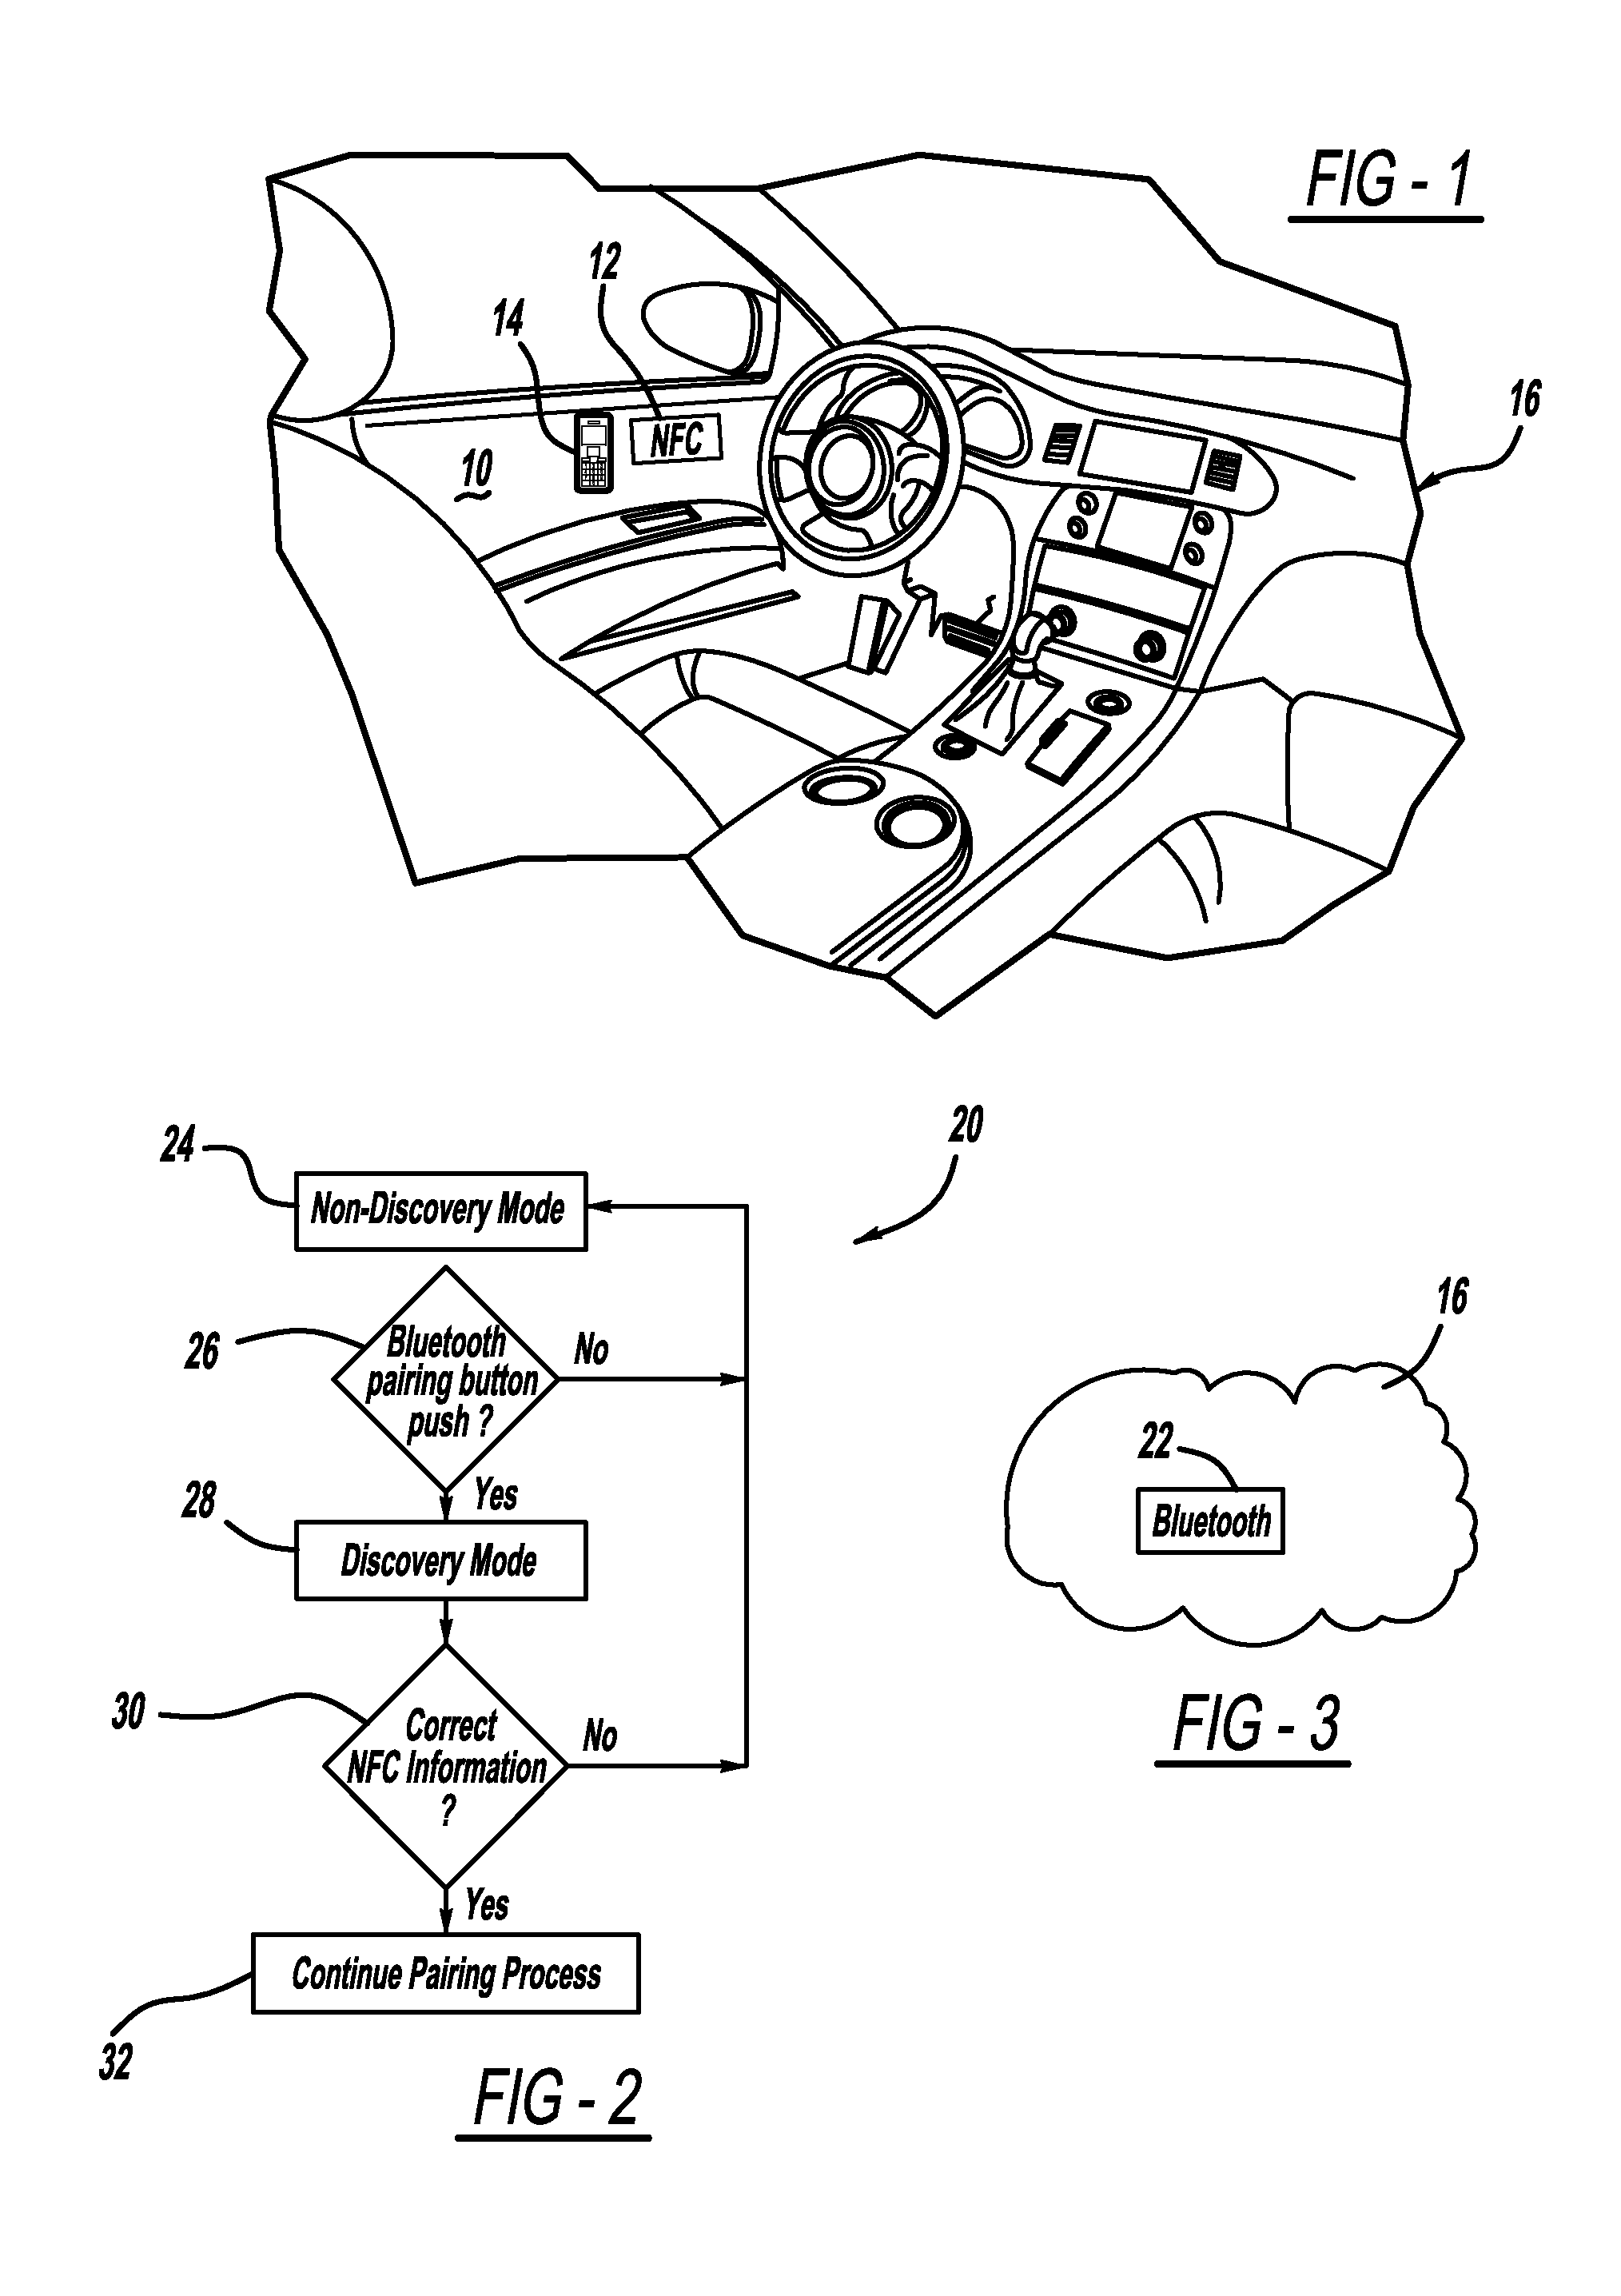 Multiple near field communication tags in a pairing domain